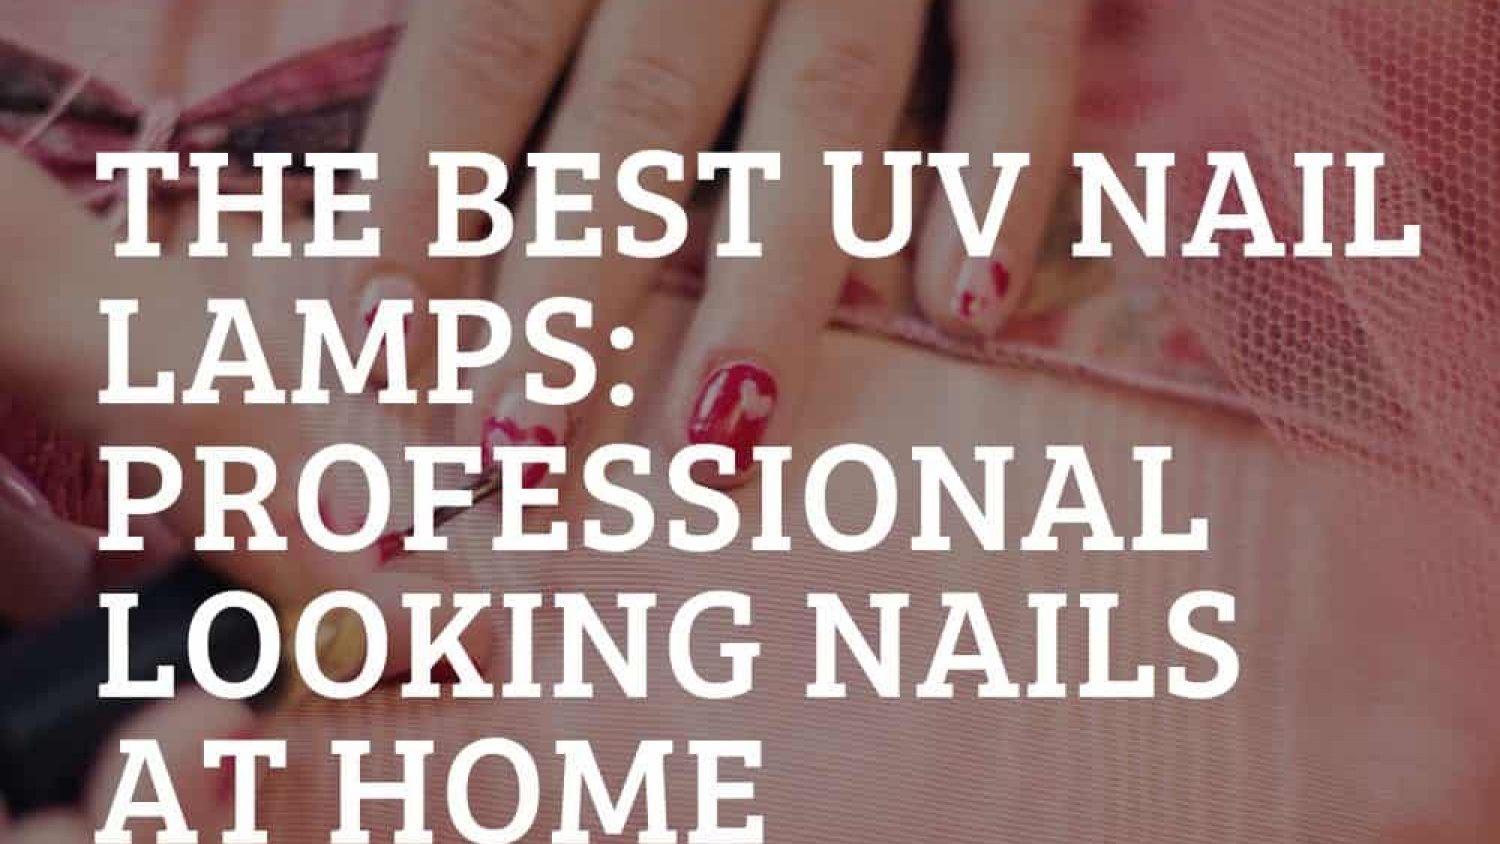 The Best UV Nail Lamps – Get Professional Looking Nails at Home